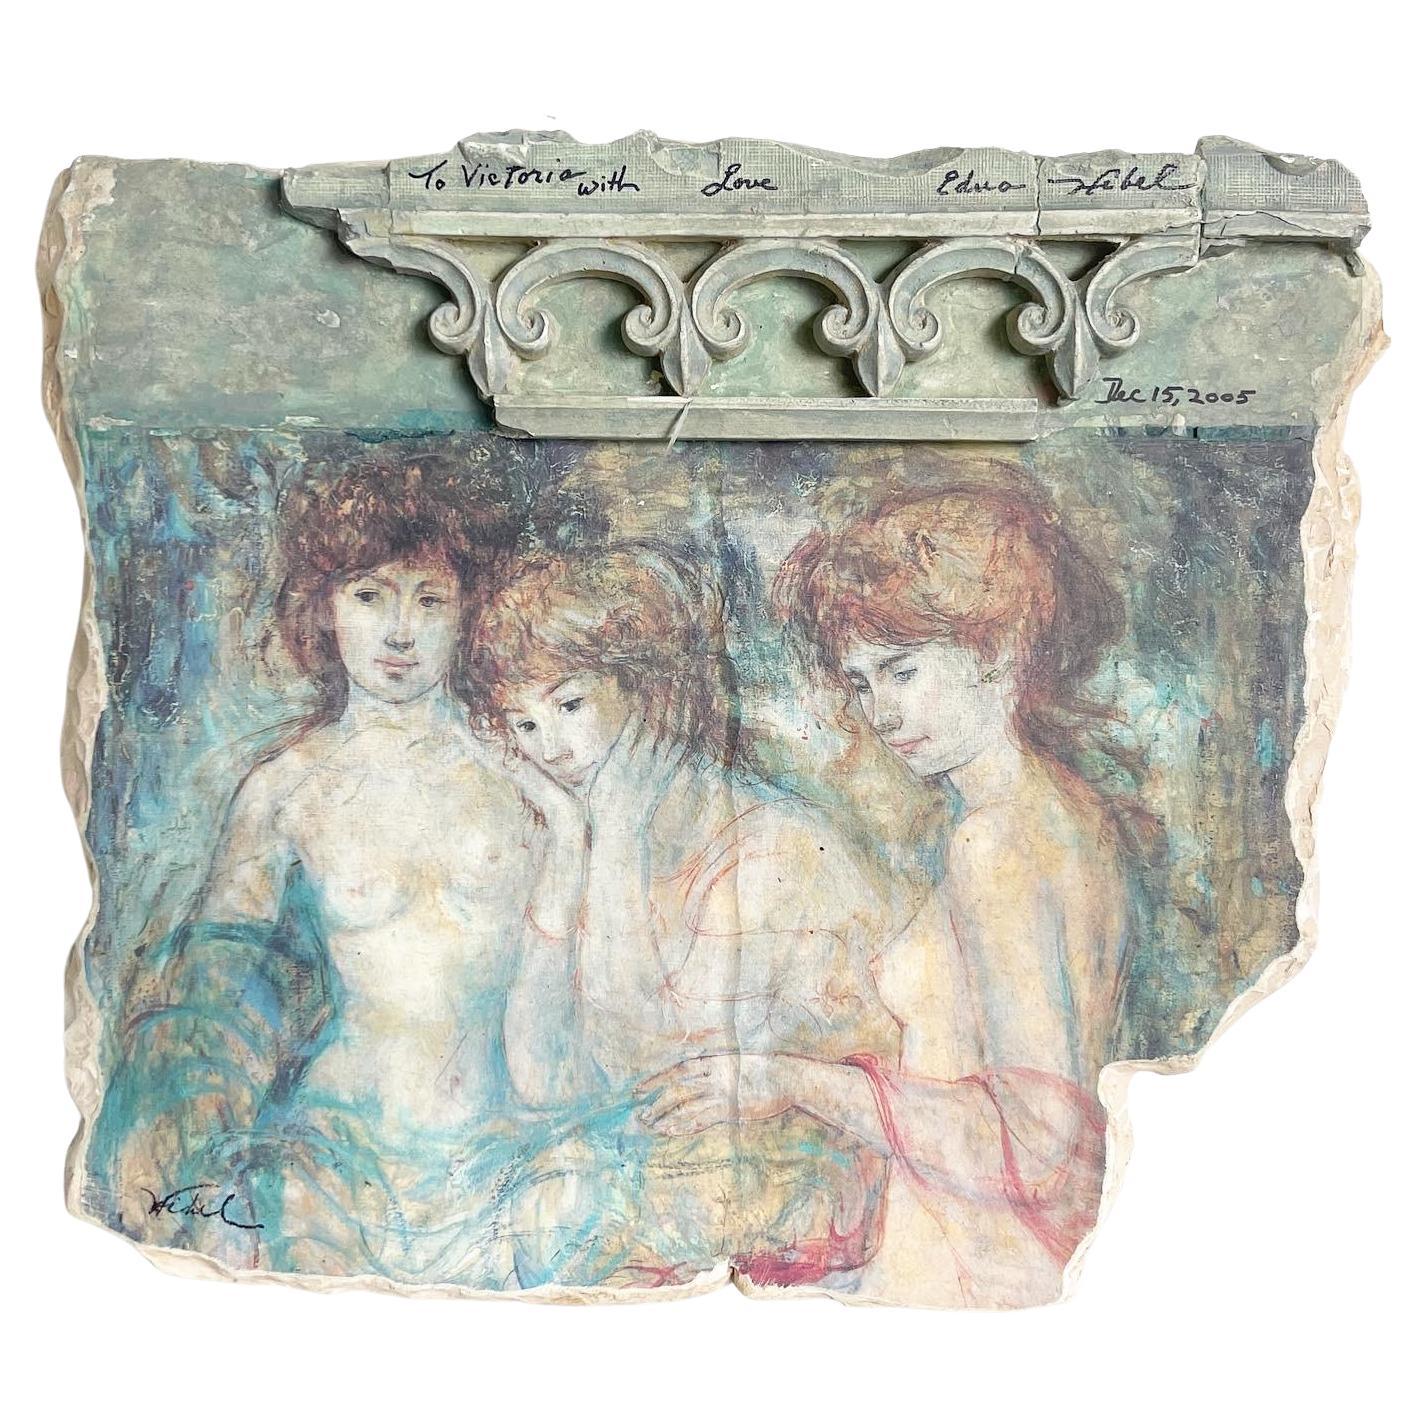 Plaster Faux Stone Painting of Three Nude Women by Edna Hibel